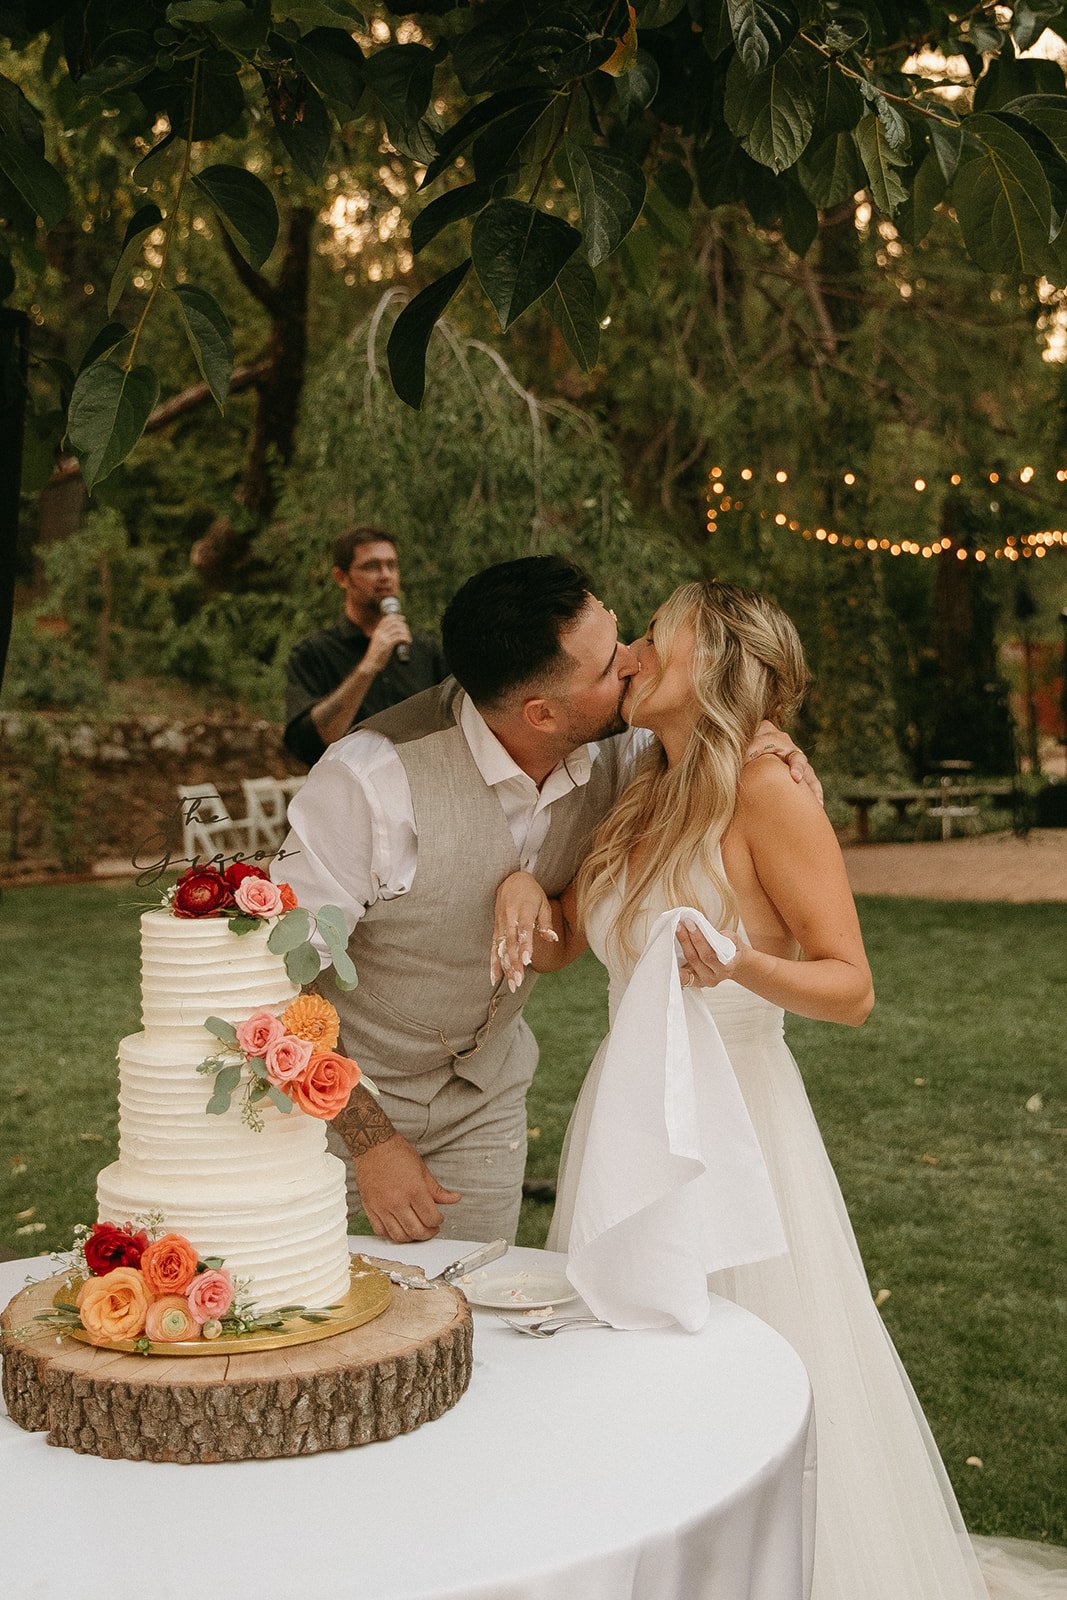 A beautiful intimate outdoor wedding day in Foresthill California with rustic and summer decor